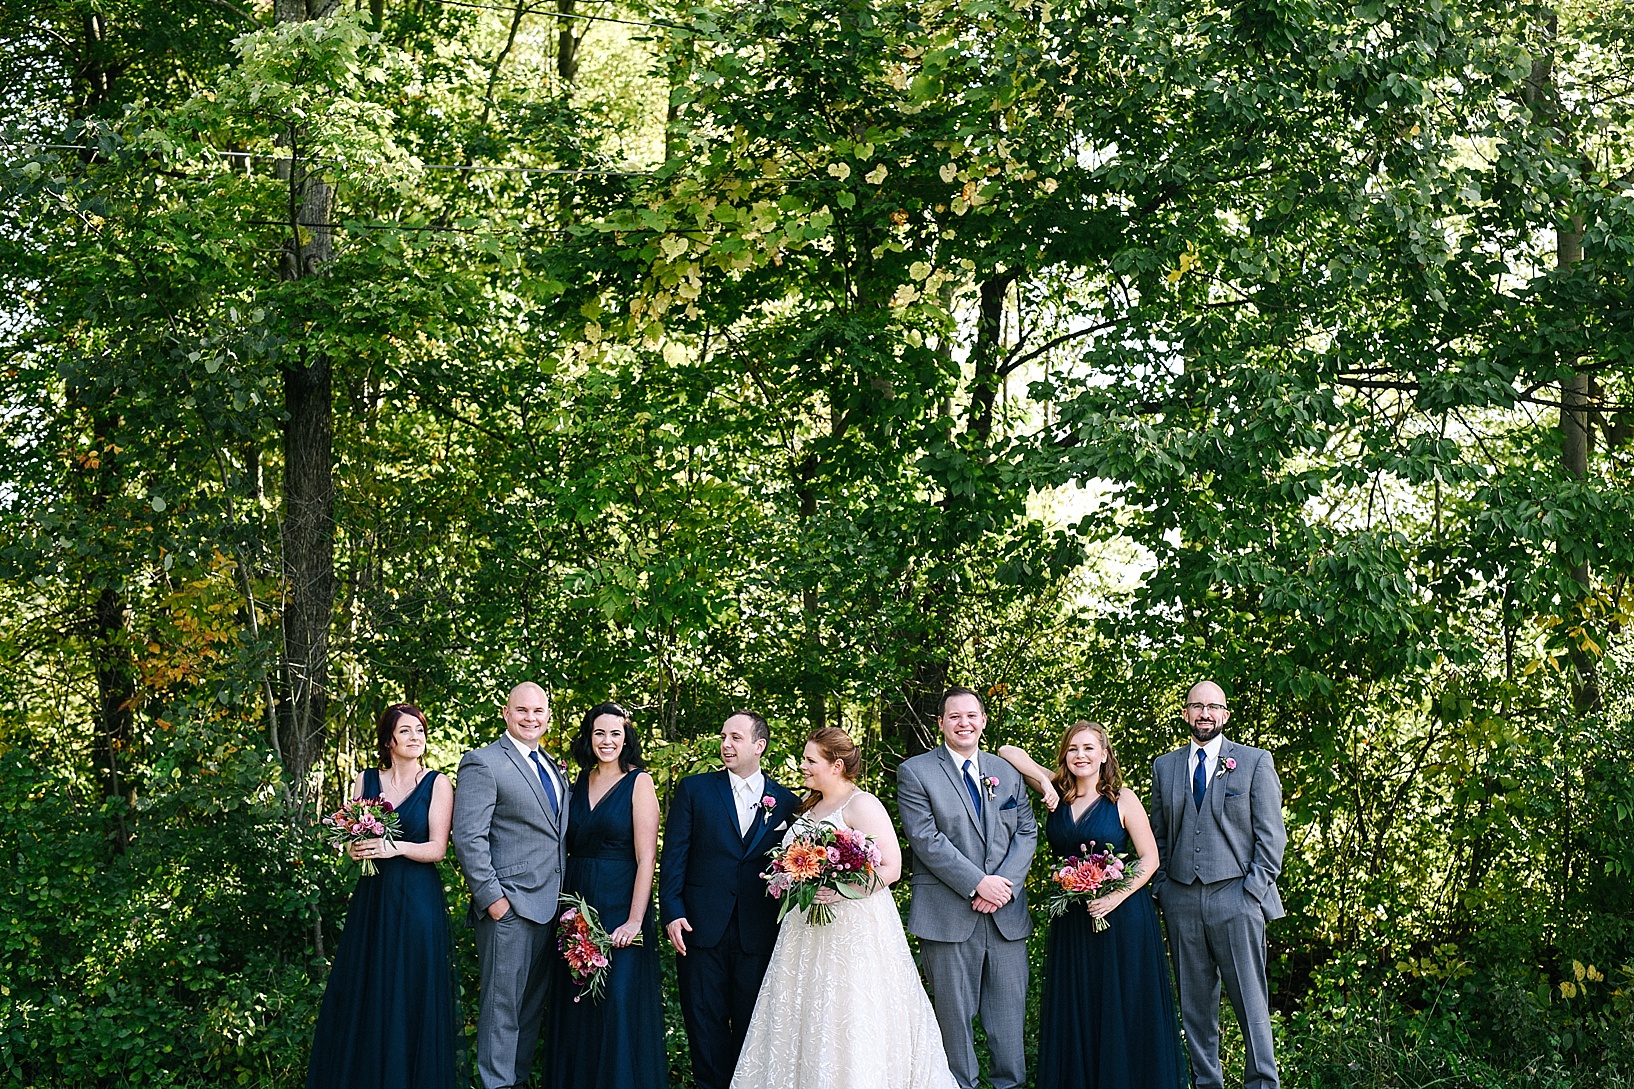 Wedding photographers in Youngstown OH Carlyn K Photography